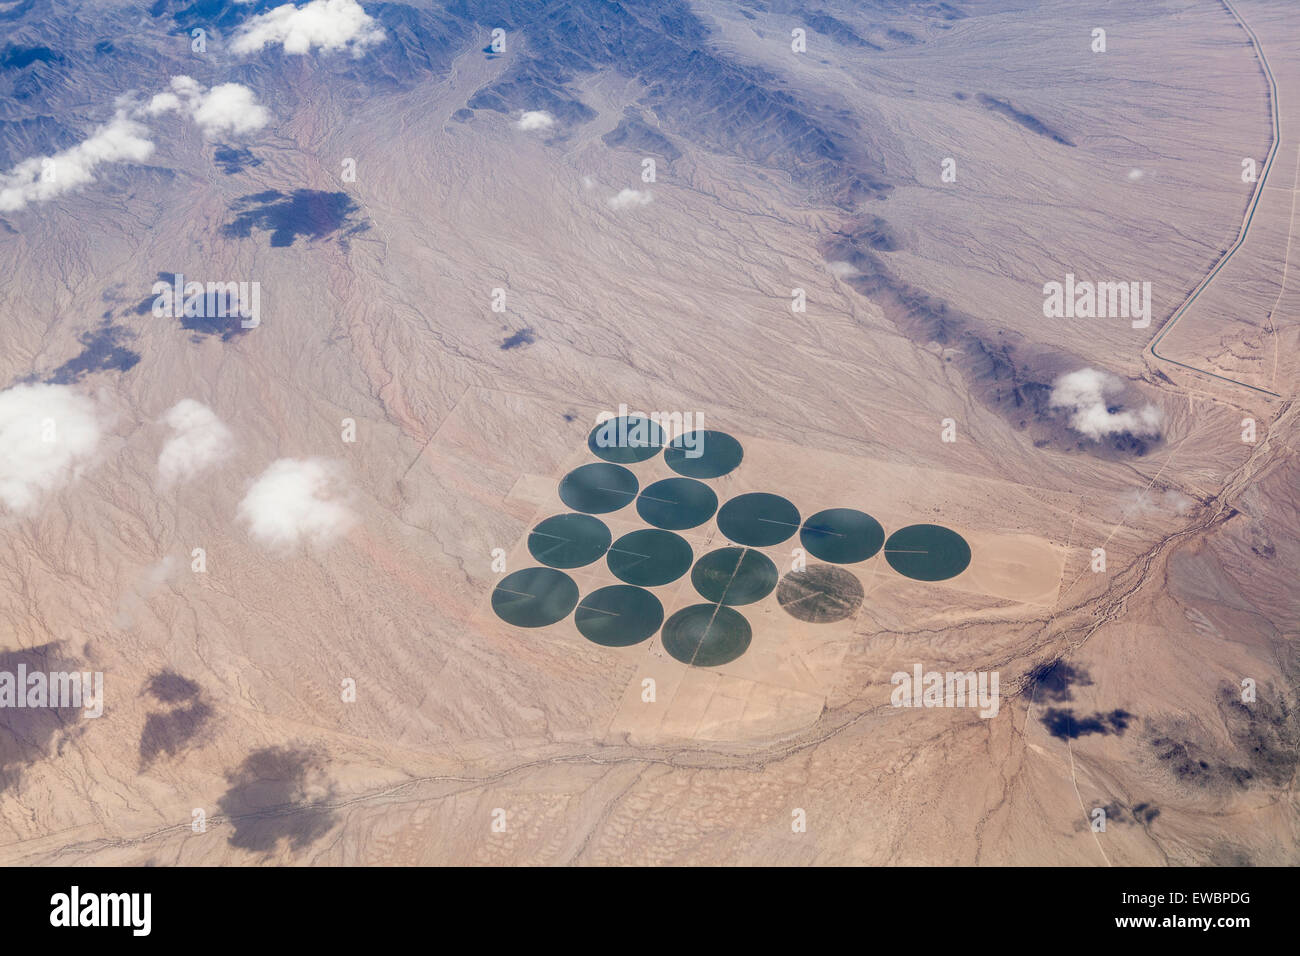 Aerial of green irrigated crop circles in a vast brown expanse of California's Mojave Desert. Stock Photo